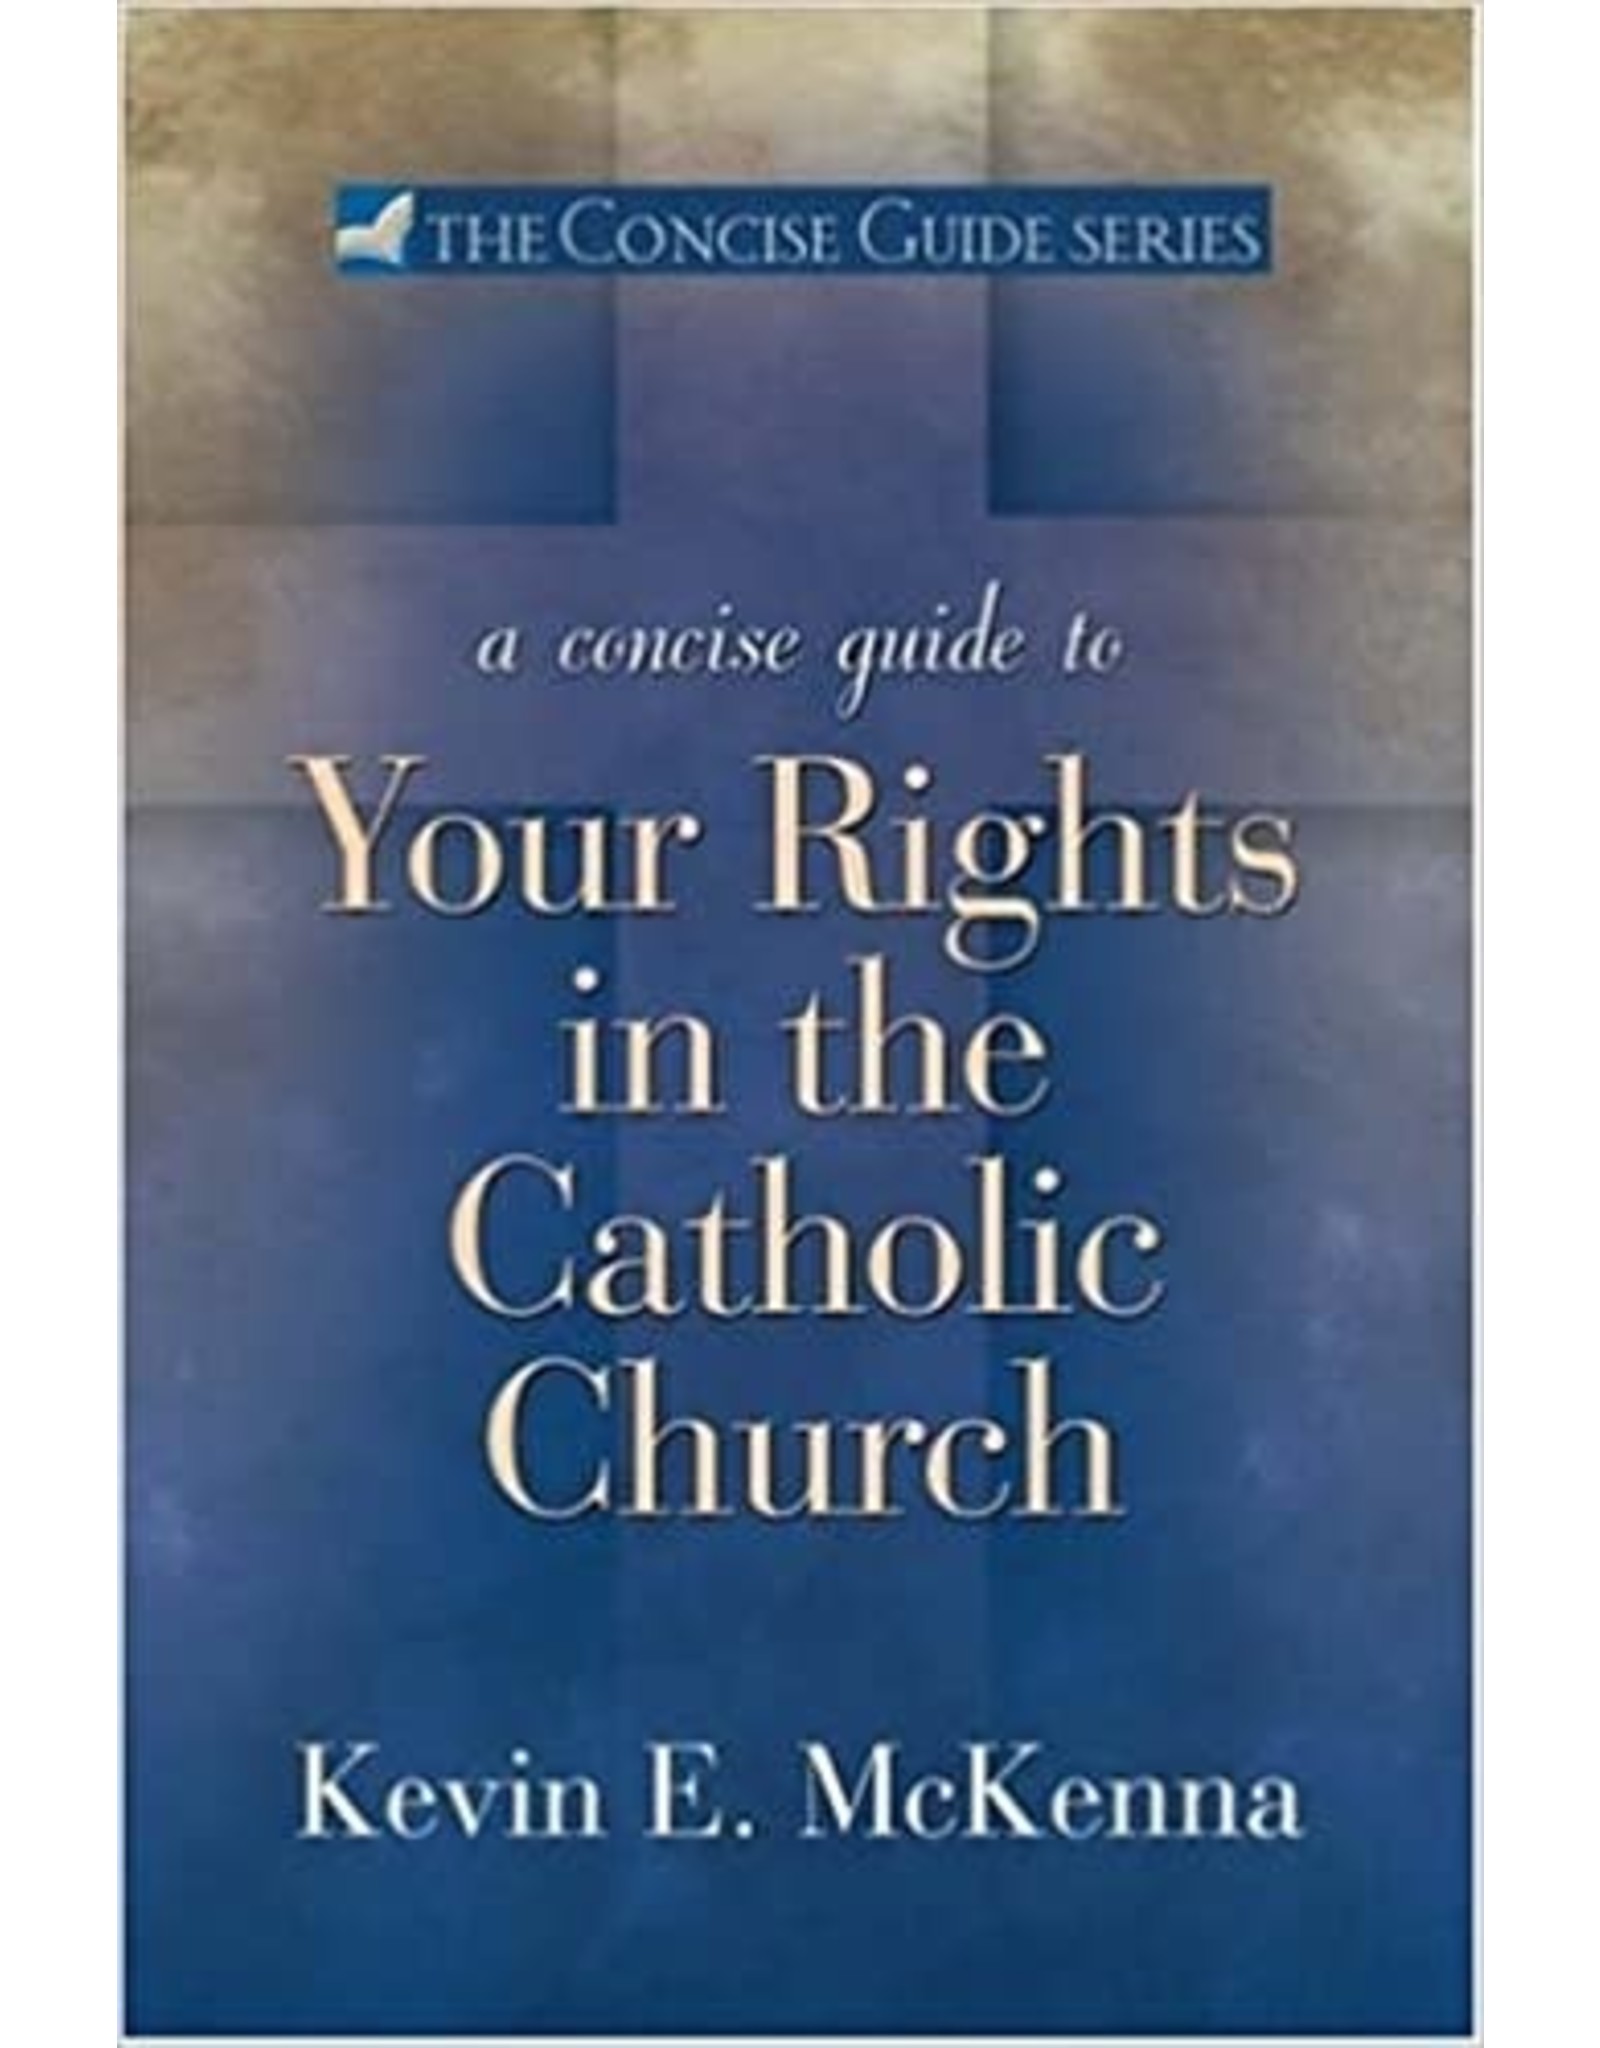 Concise Guide to Your Rights in the Catholic Church